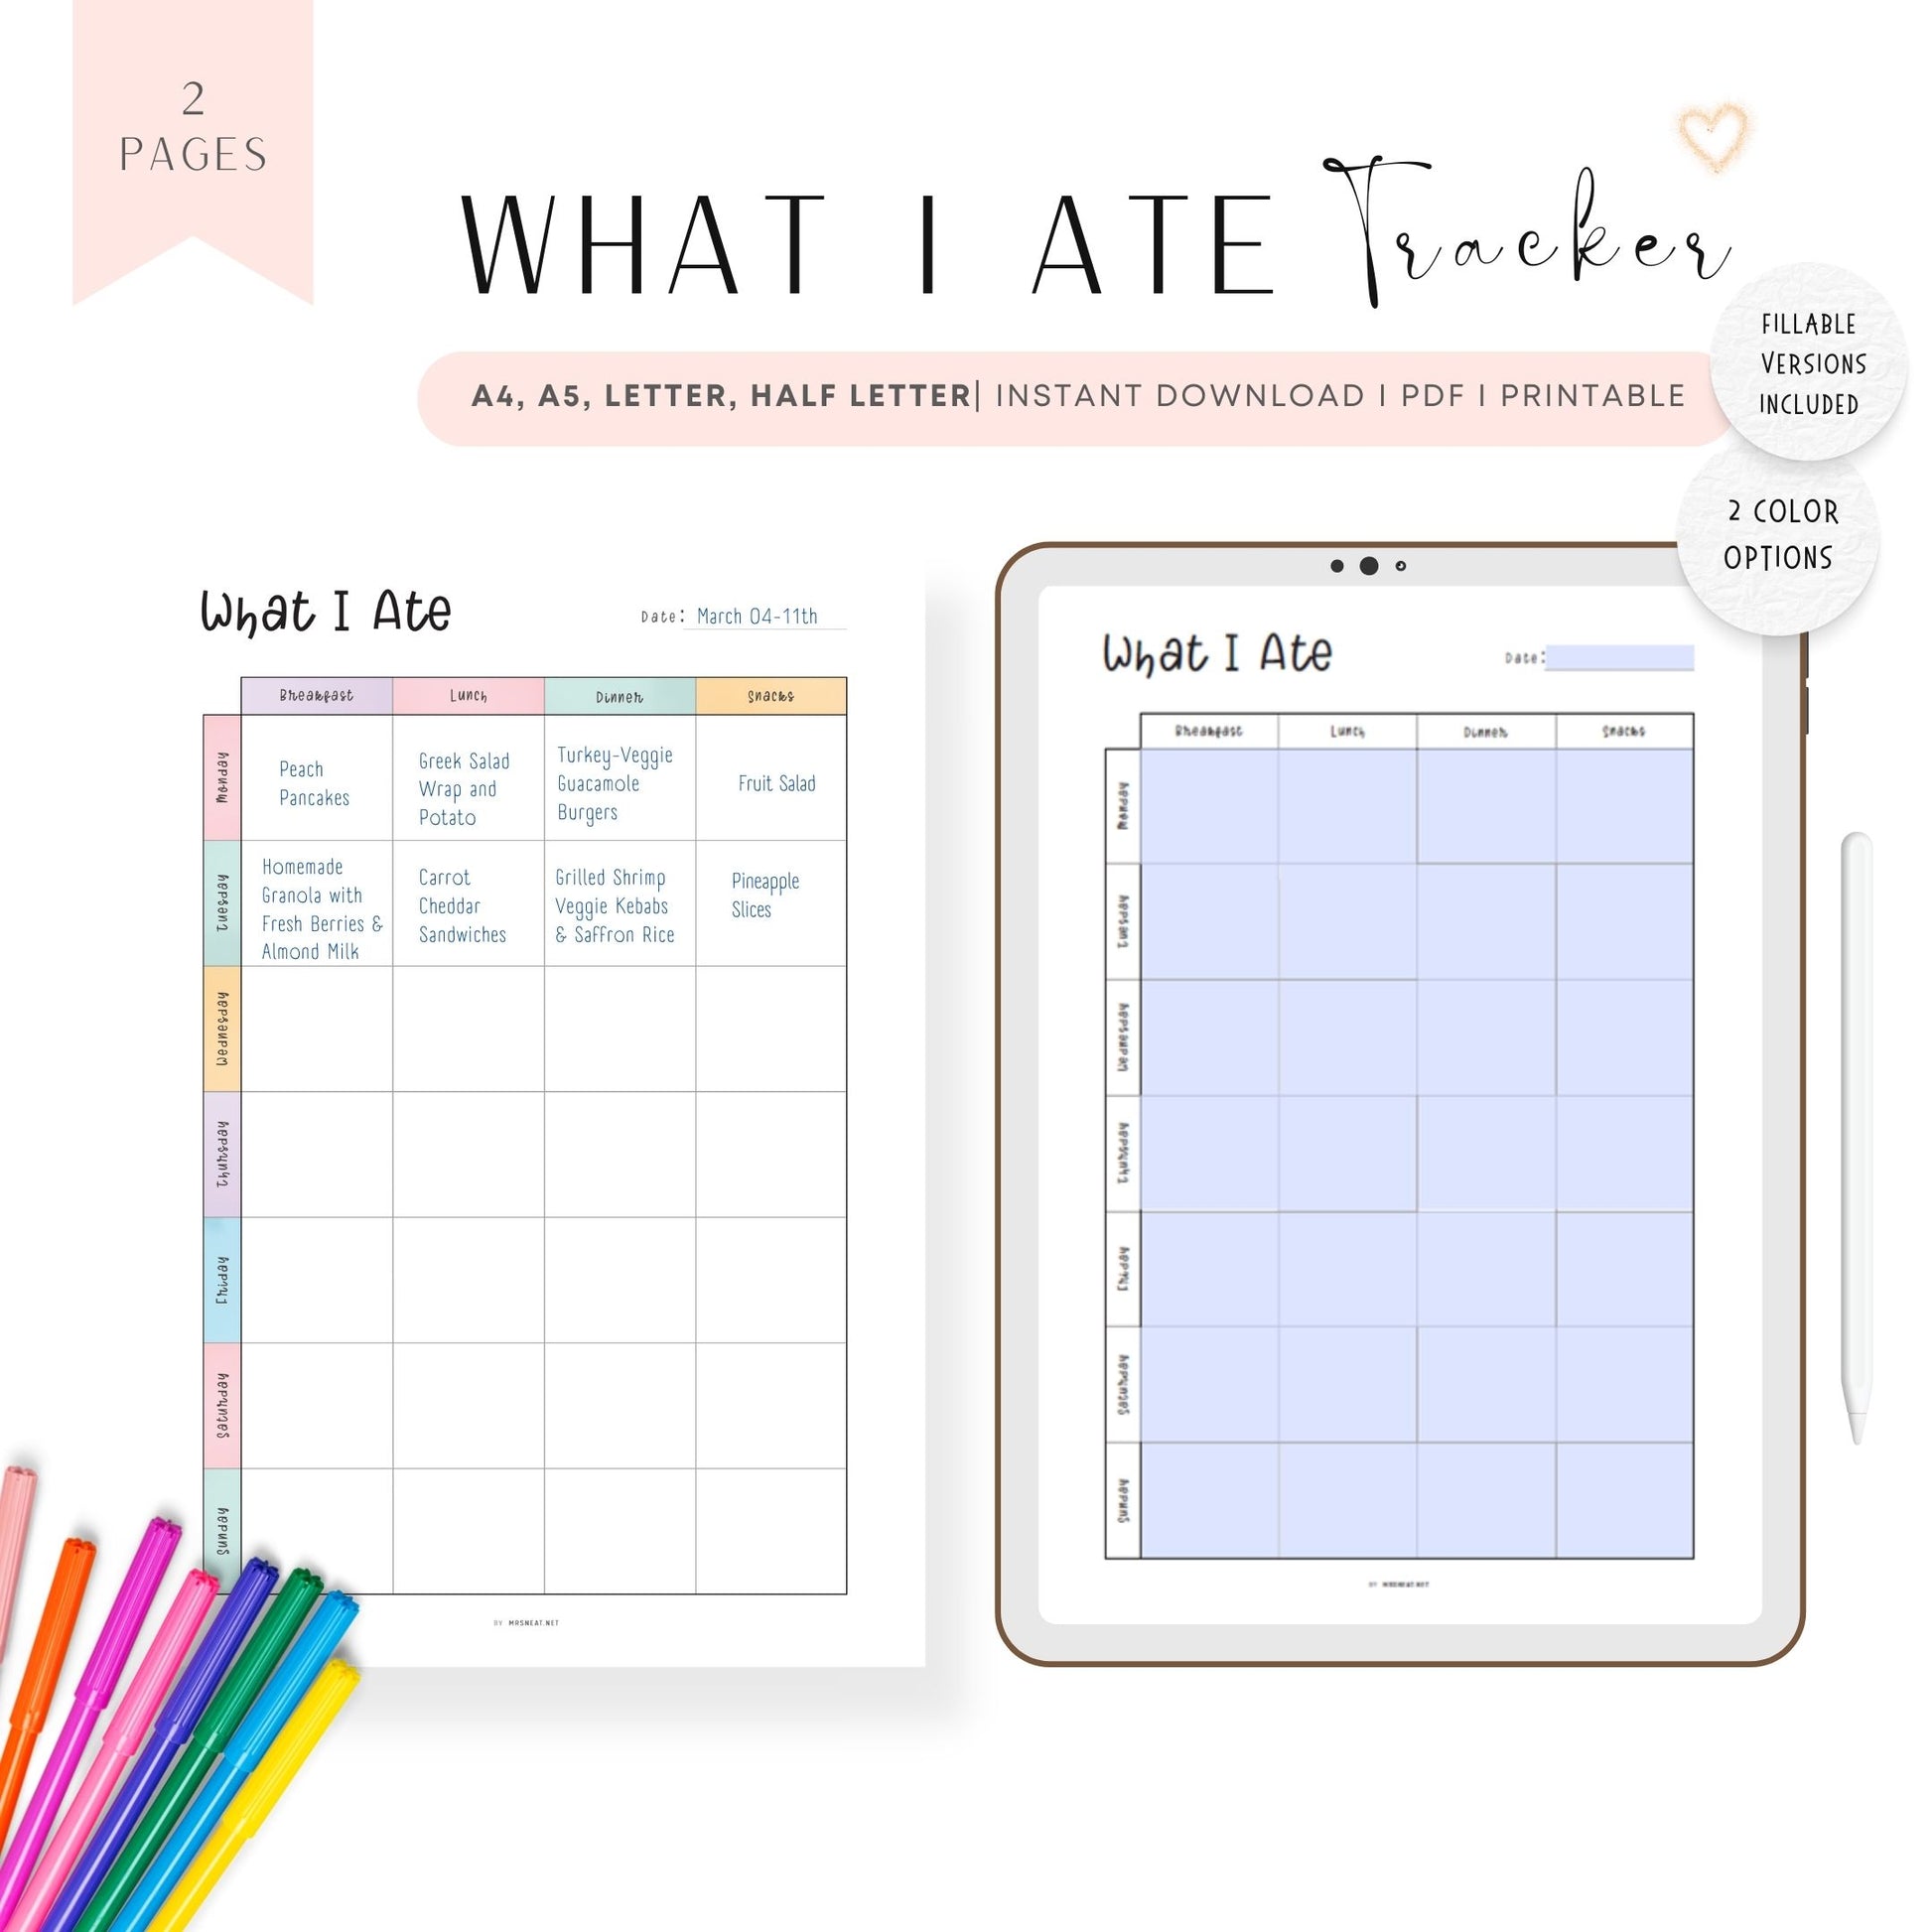 Food Journal Template Printable, A4, A5, Letter, Half Letter, 2 color options, fillable versions, printable inserts